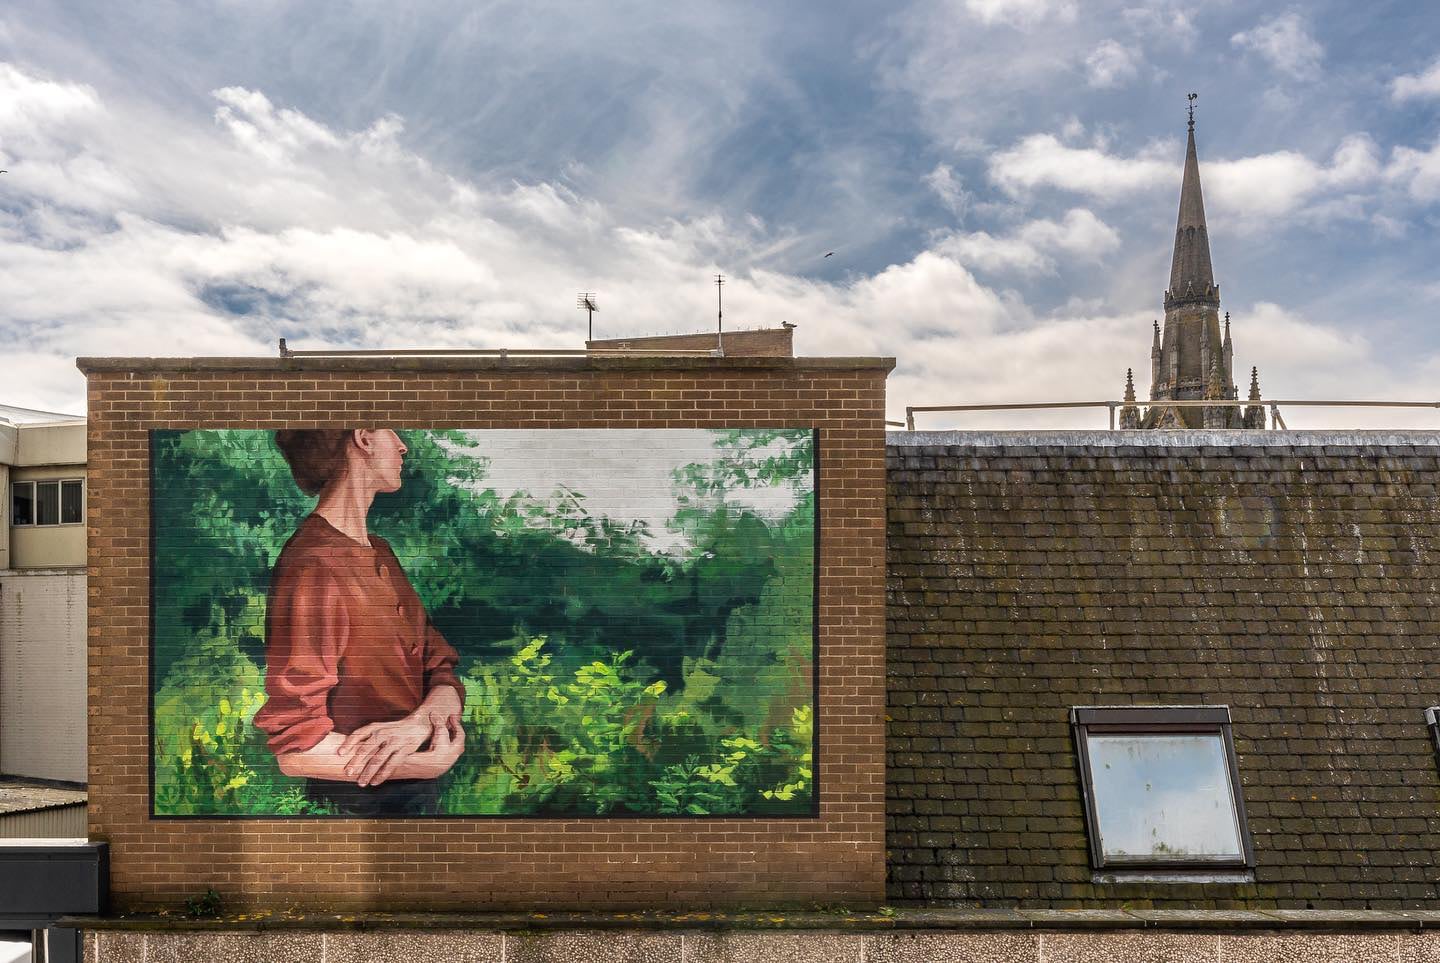 A woman wearing a beige top with her face turned away from the viewer looks back at lush greenery and clasps her arms in a mural on a brick facade.  A bell tower is in the background